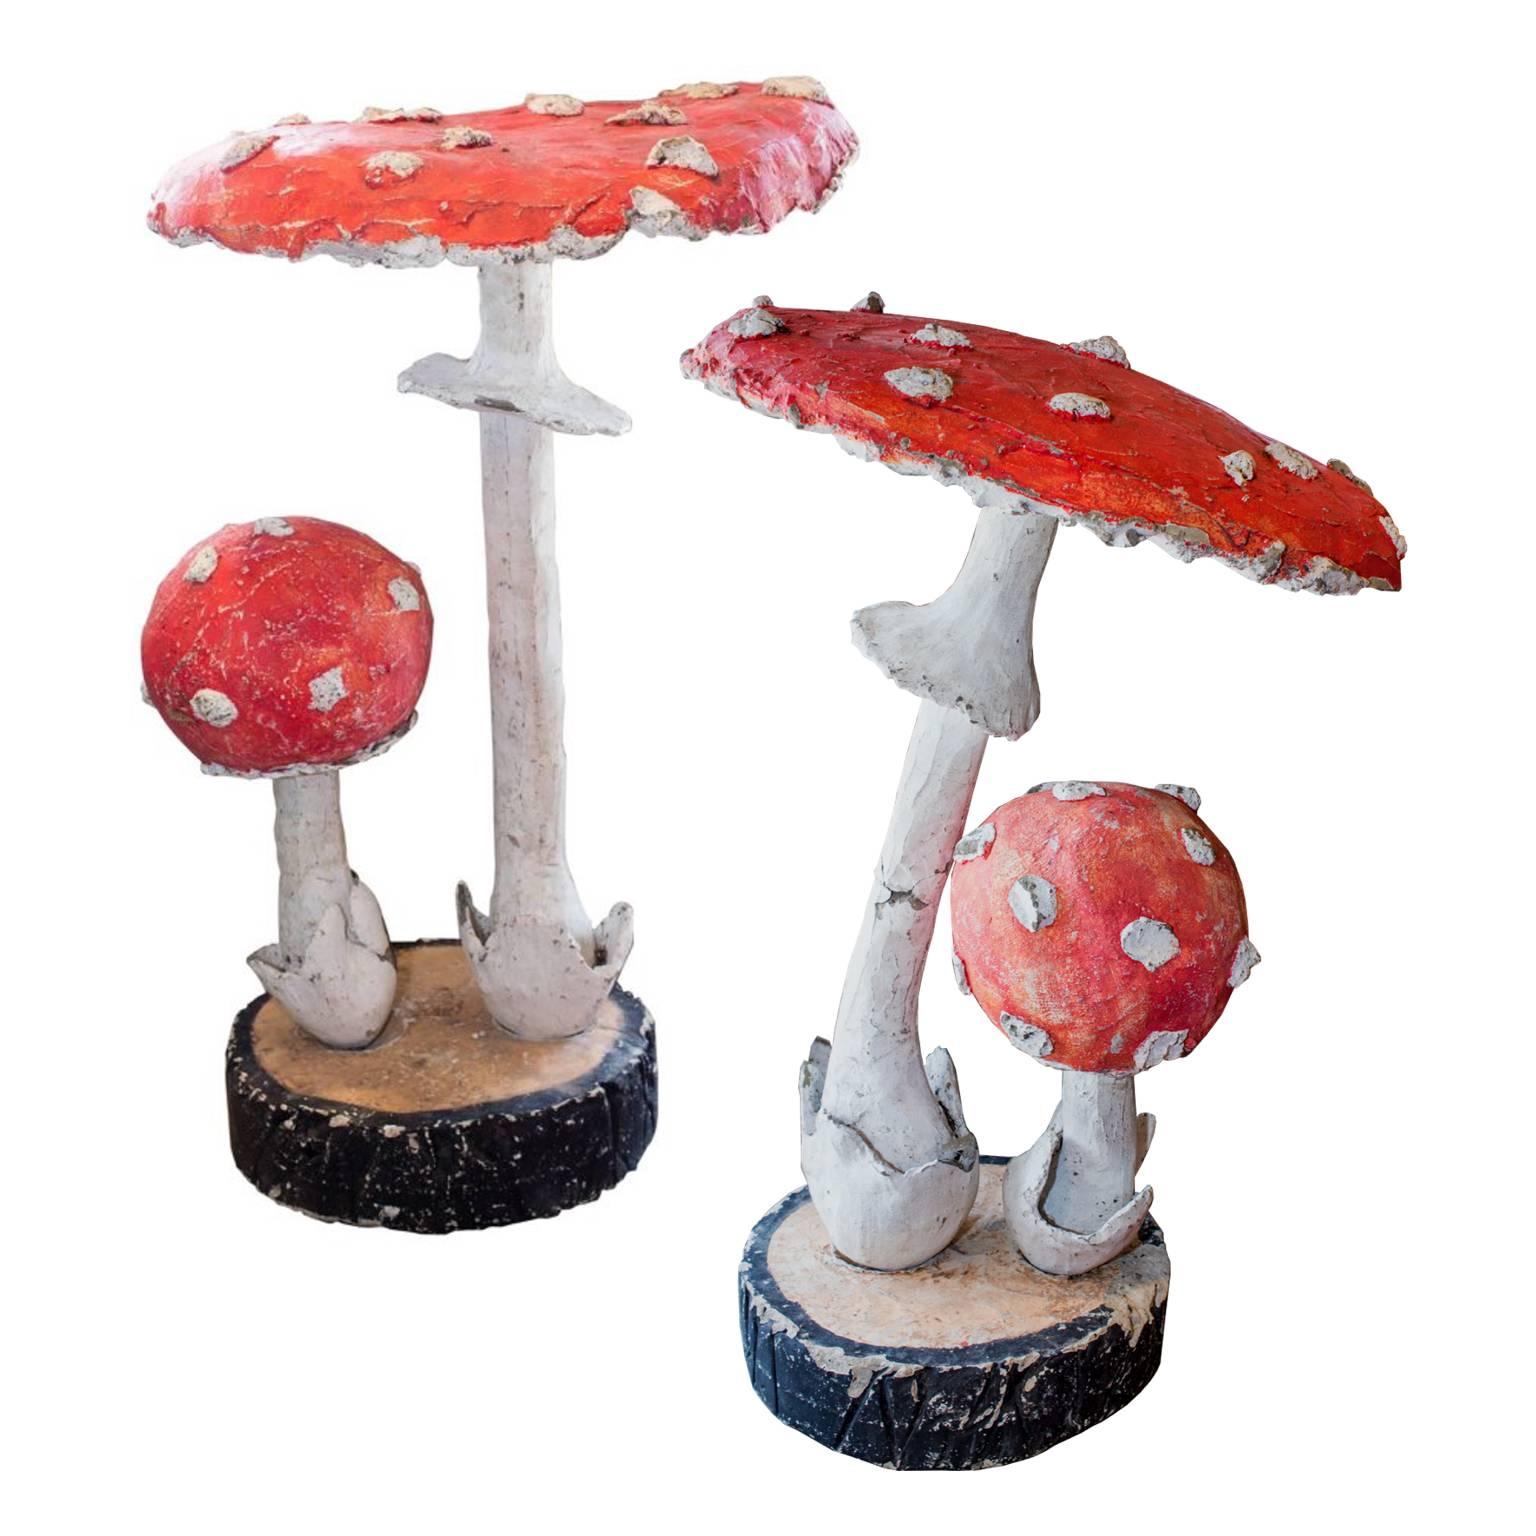 Pair of Midcentury French Faux Bois Mushroom Ornaments Found in France